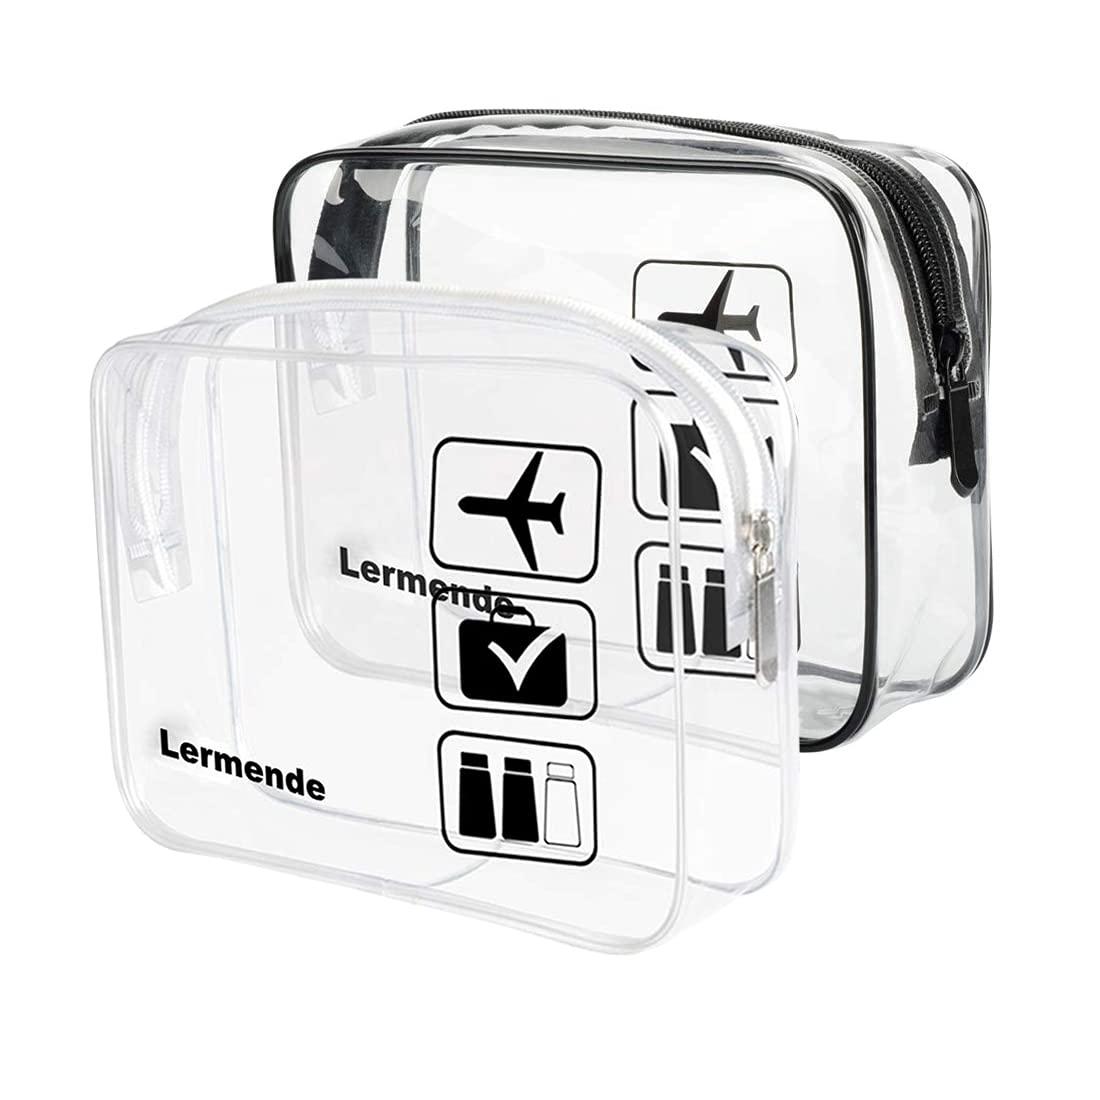 2pcs/pack Lermende Clear Toiletry Bag TSA Approved Travel Carry On